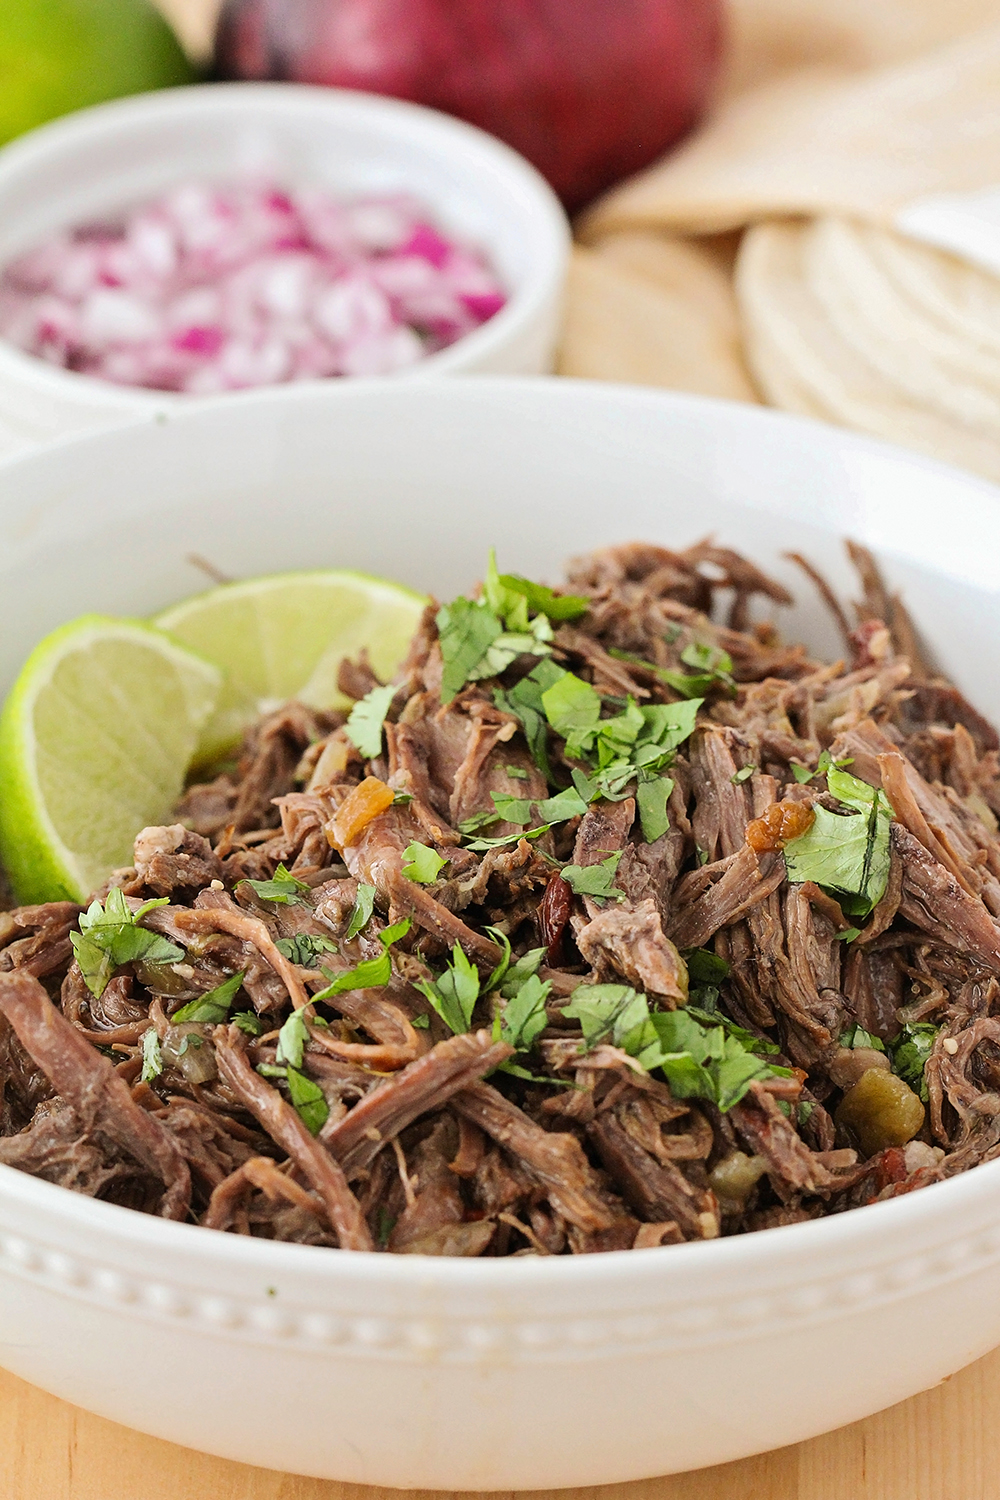 These juicy and flavorful Instant Pot barbacoa tacos are so delicious and easy to make, too!